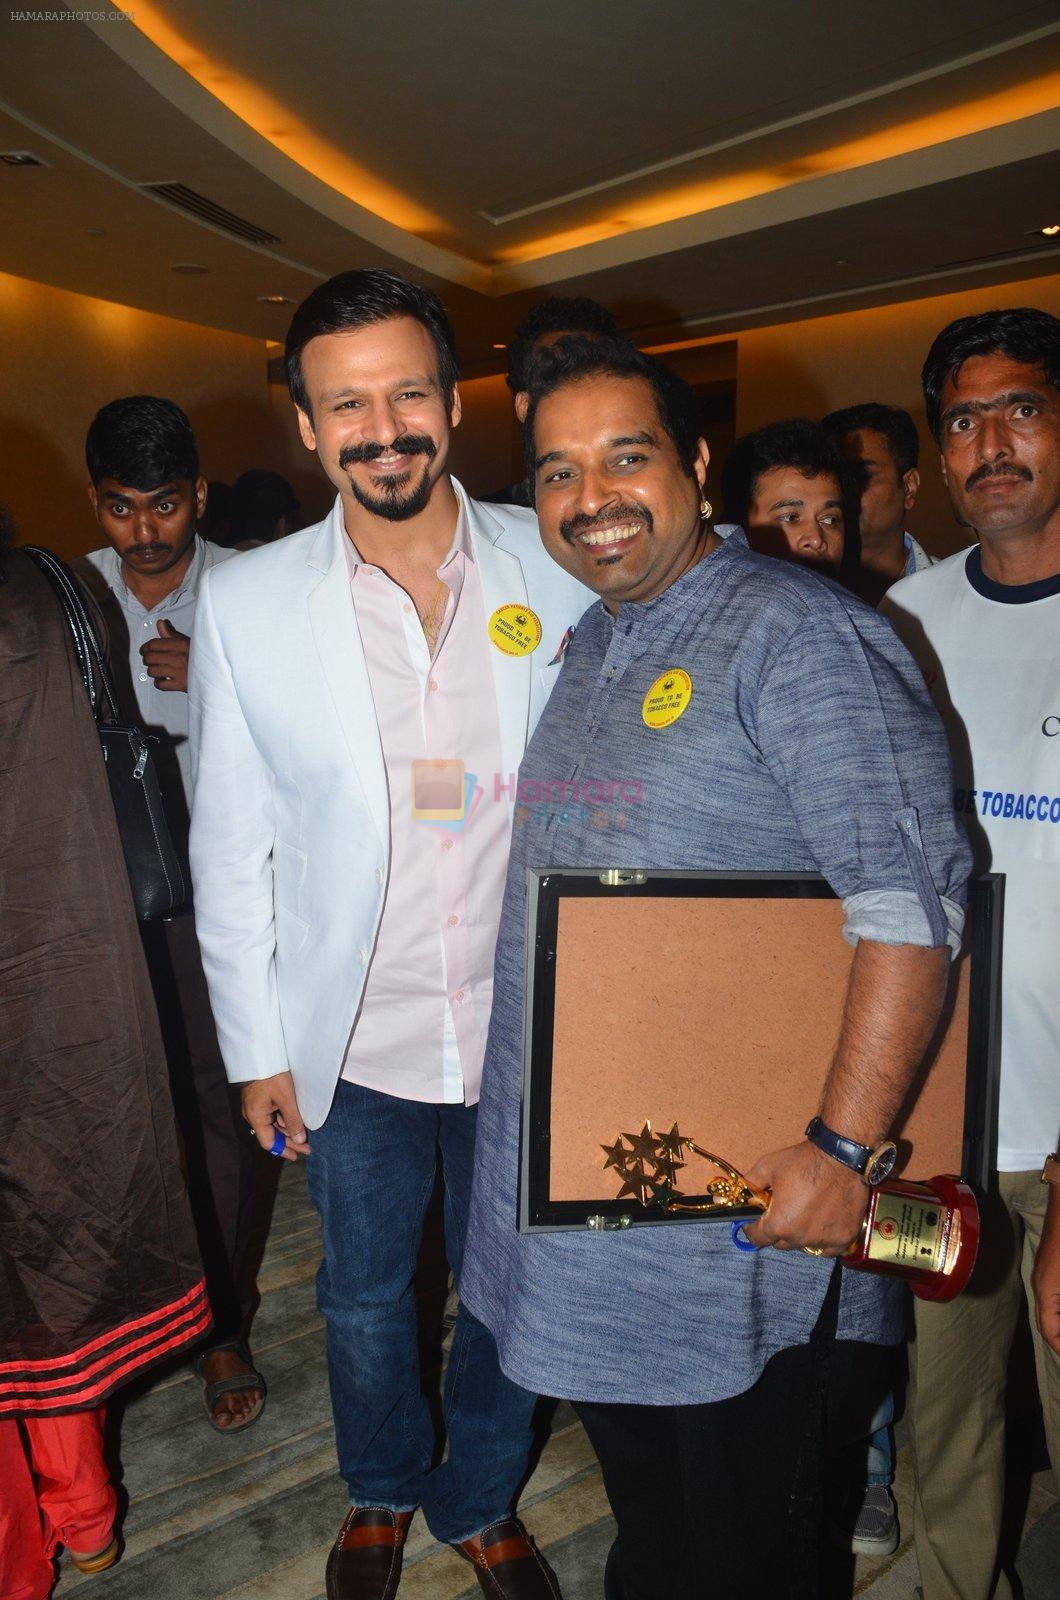 Vivek Oberoi and Shankar Mahadevan at an event to support fight against Tobacco and Cancer and the cause in Mumbai on 11th June 2016